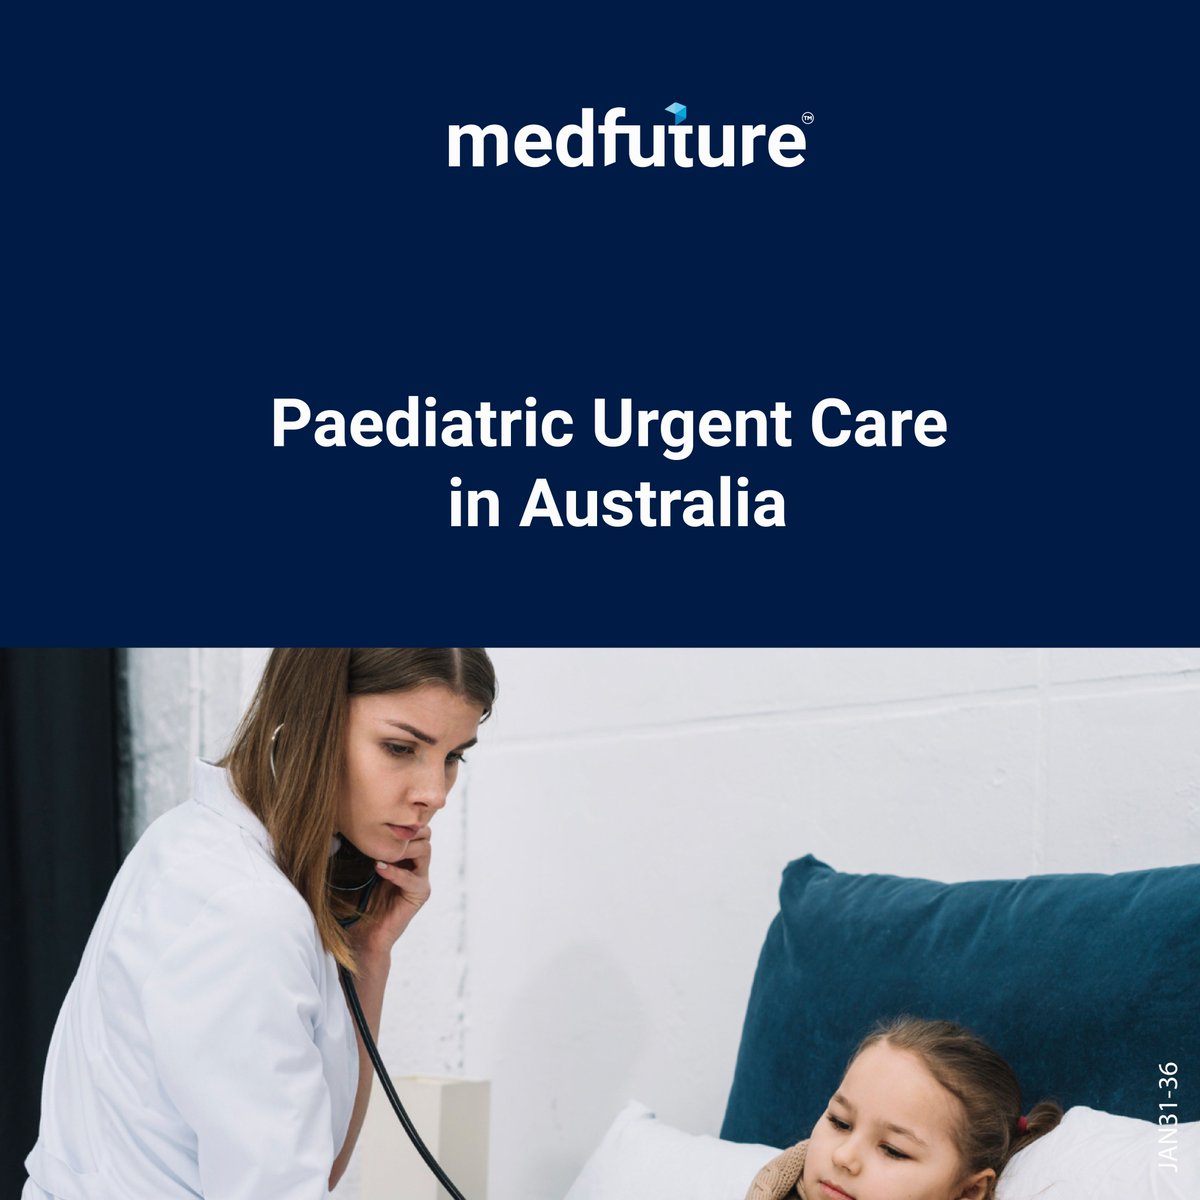 Nurturing Health for Australia's Little Ones. Explore the world of tailored paediatric urgent care with insights into child-centric facilities, benefits, and job opportunities. #PaediatricCare #ChildHealth #AustraliaHealthcare #KidsWellbeing

Blog Link - tst.medfuture.com.au/blog/post/paed…